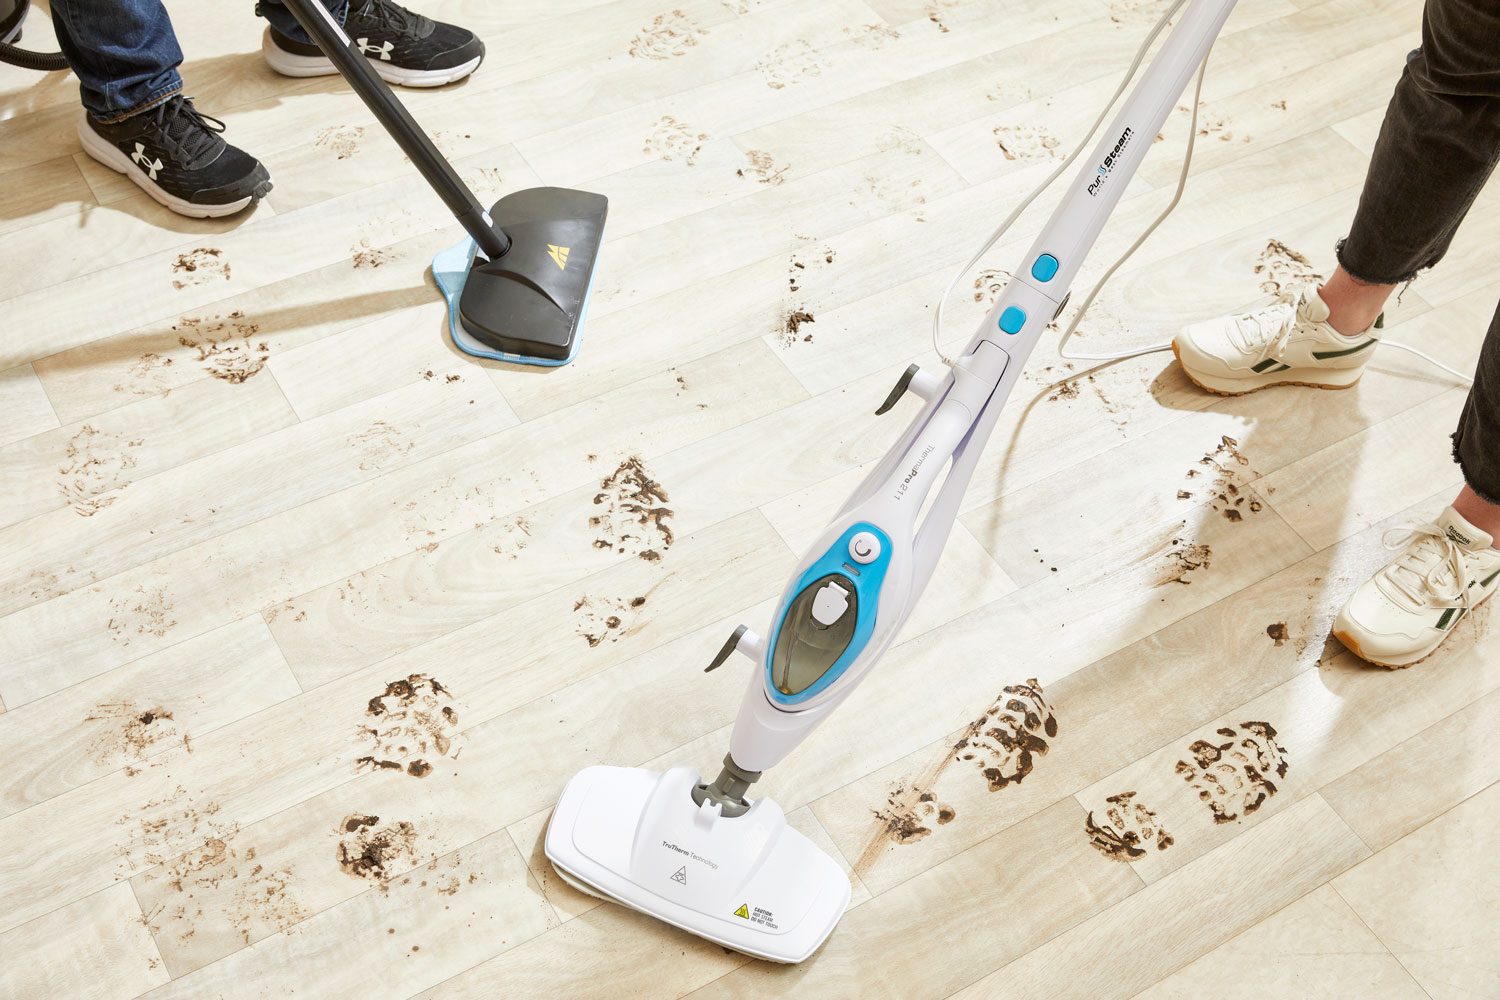 Testing steam cleaners on a dirty wood floor